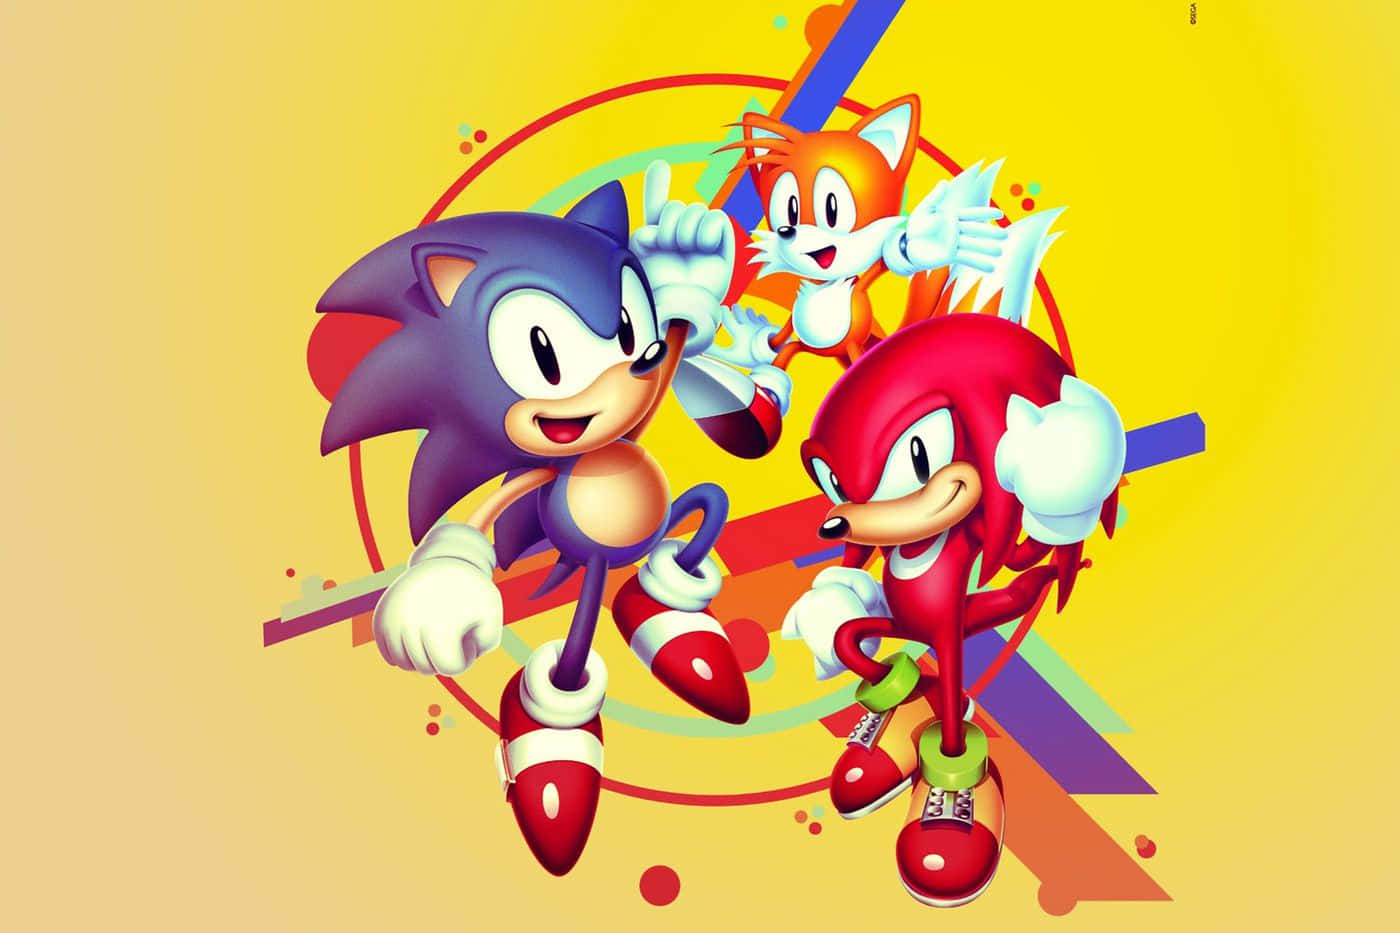 Step up your game with Sonic Mania! Wallpaper